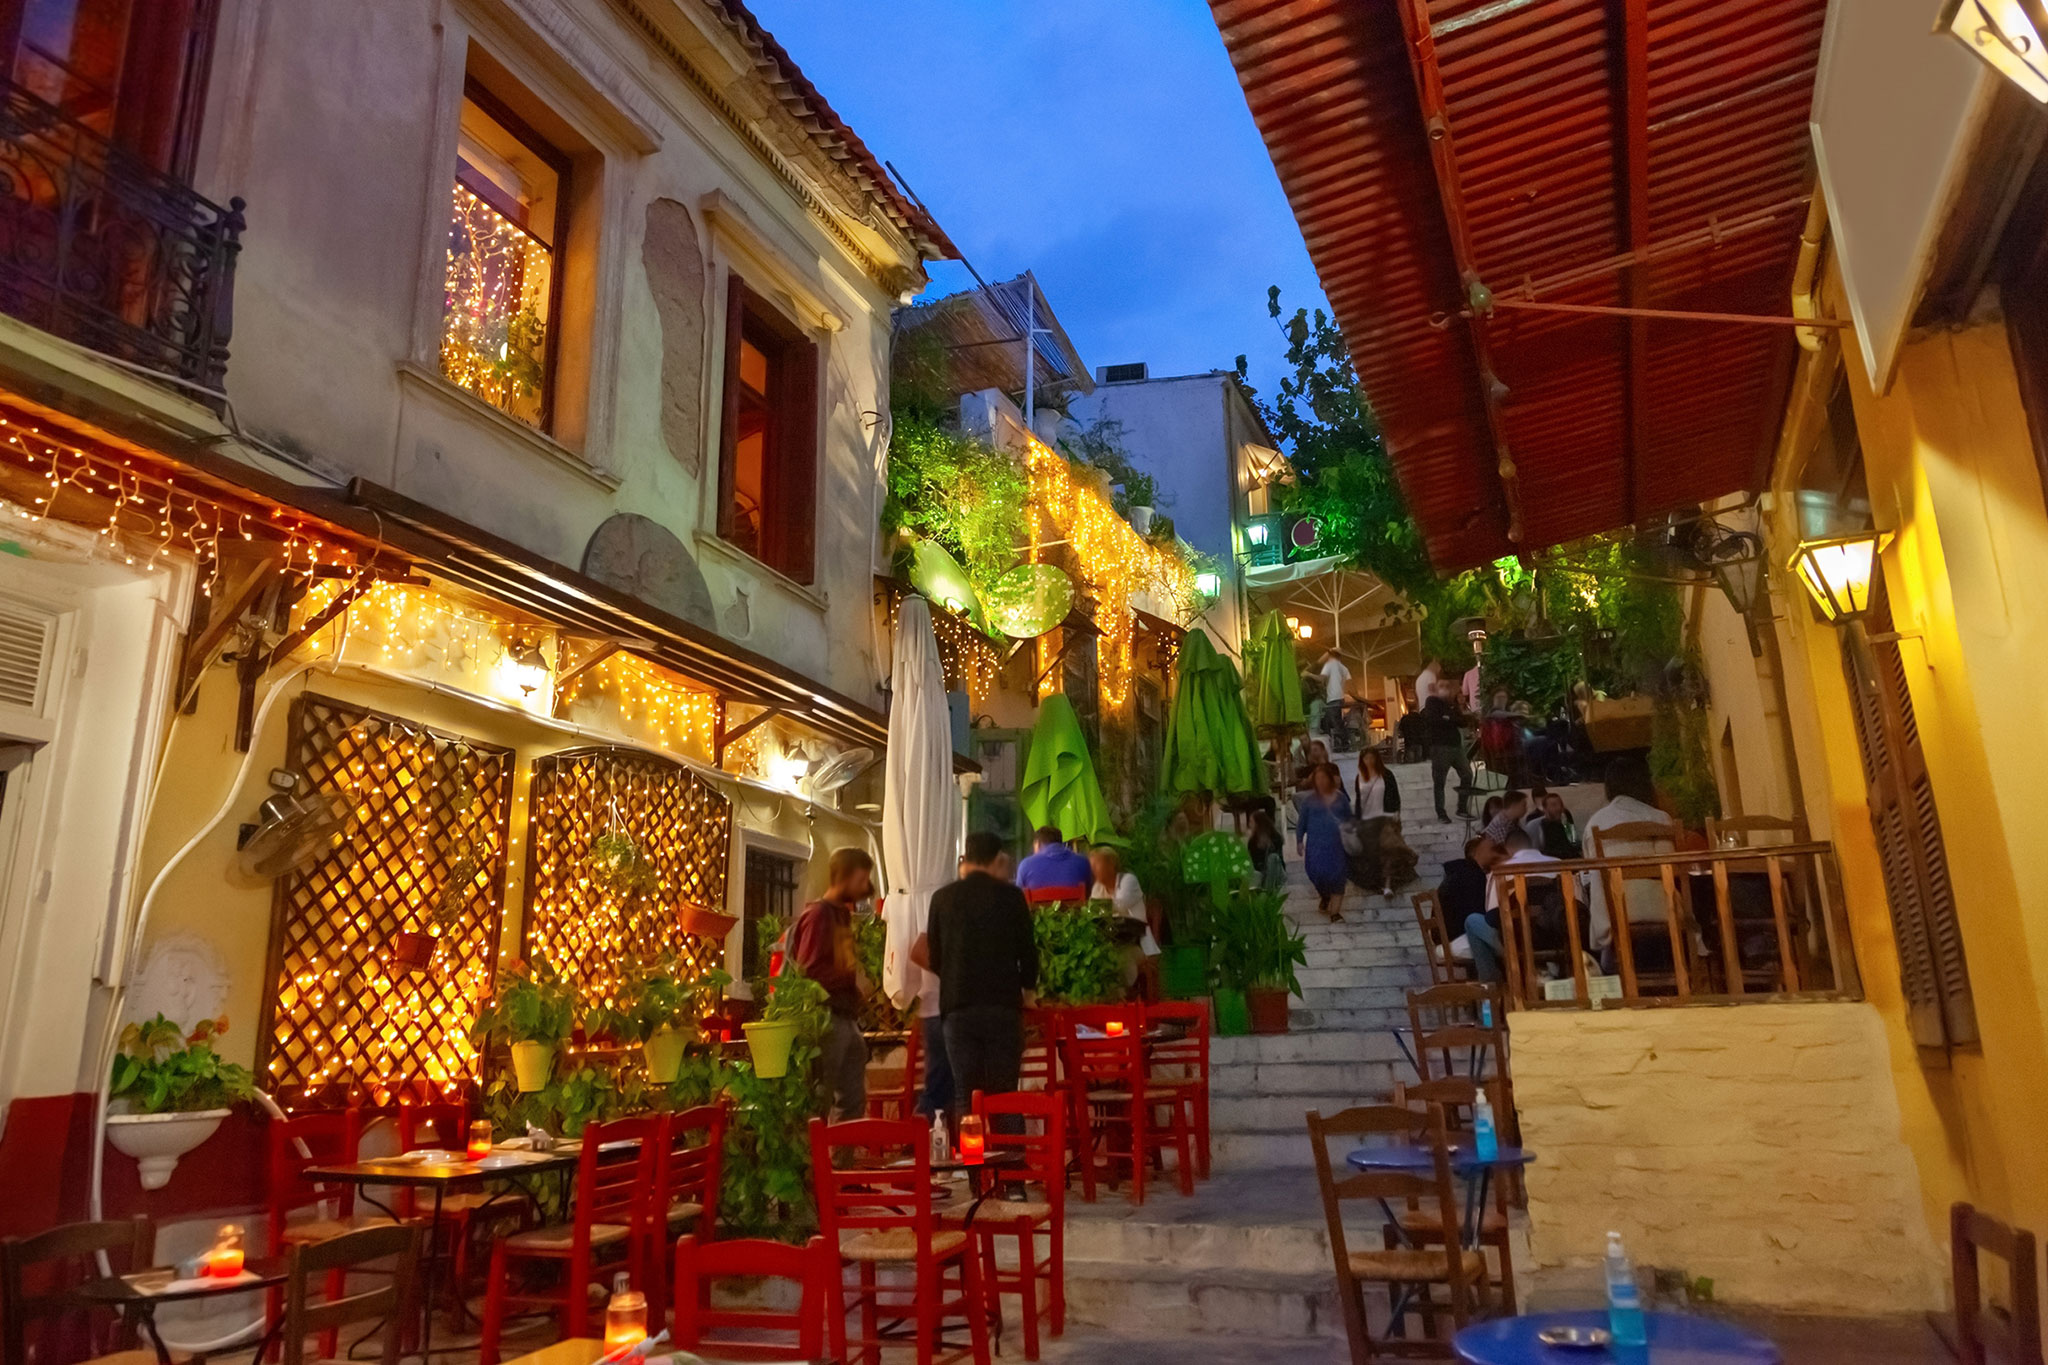 Lively atmosphere in the historic Plaka neighborhood of Athens with locals and tourists enjoying outdoor eateries among illuminated, colorful buildings.